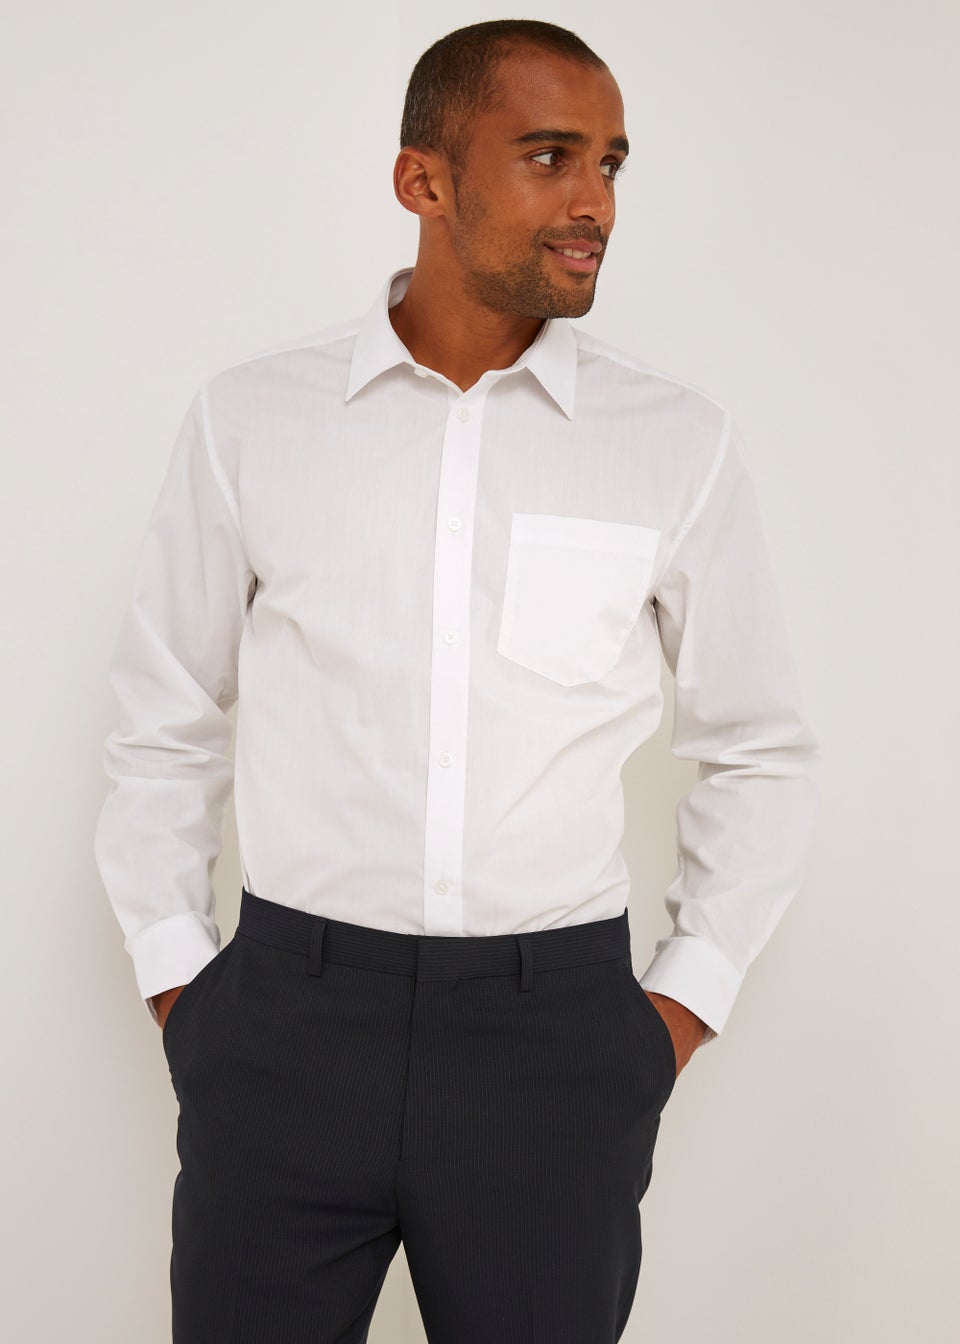 Taylor & Wright 3 Pack White Easy Care Regular Fit Shirts